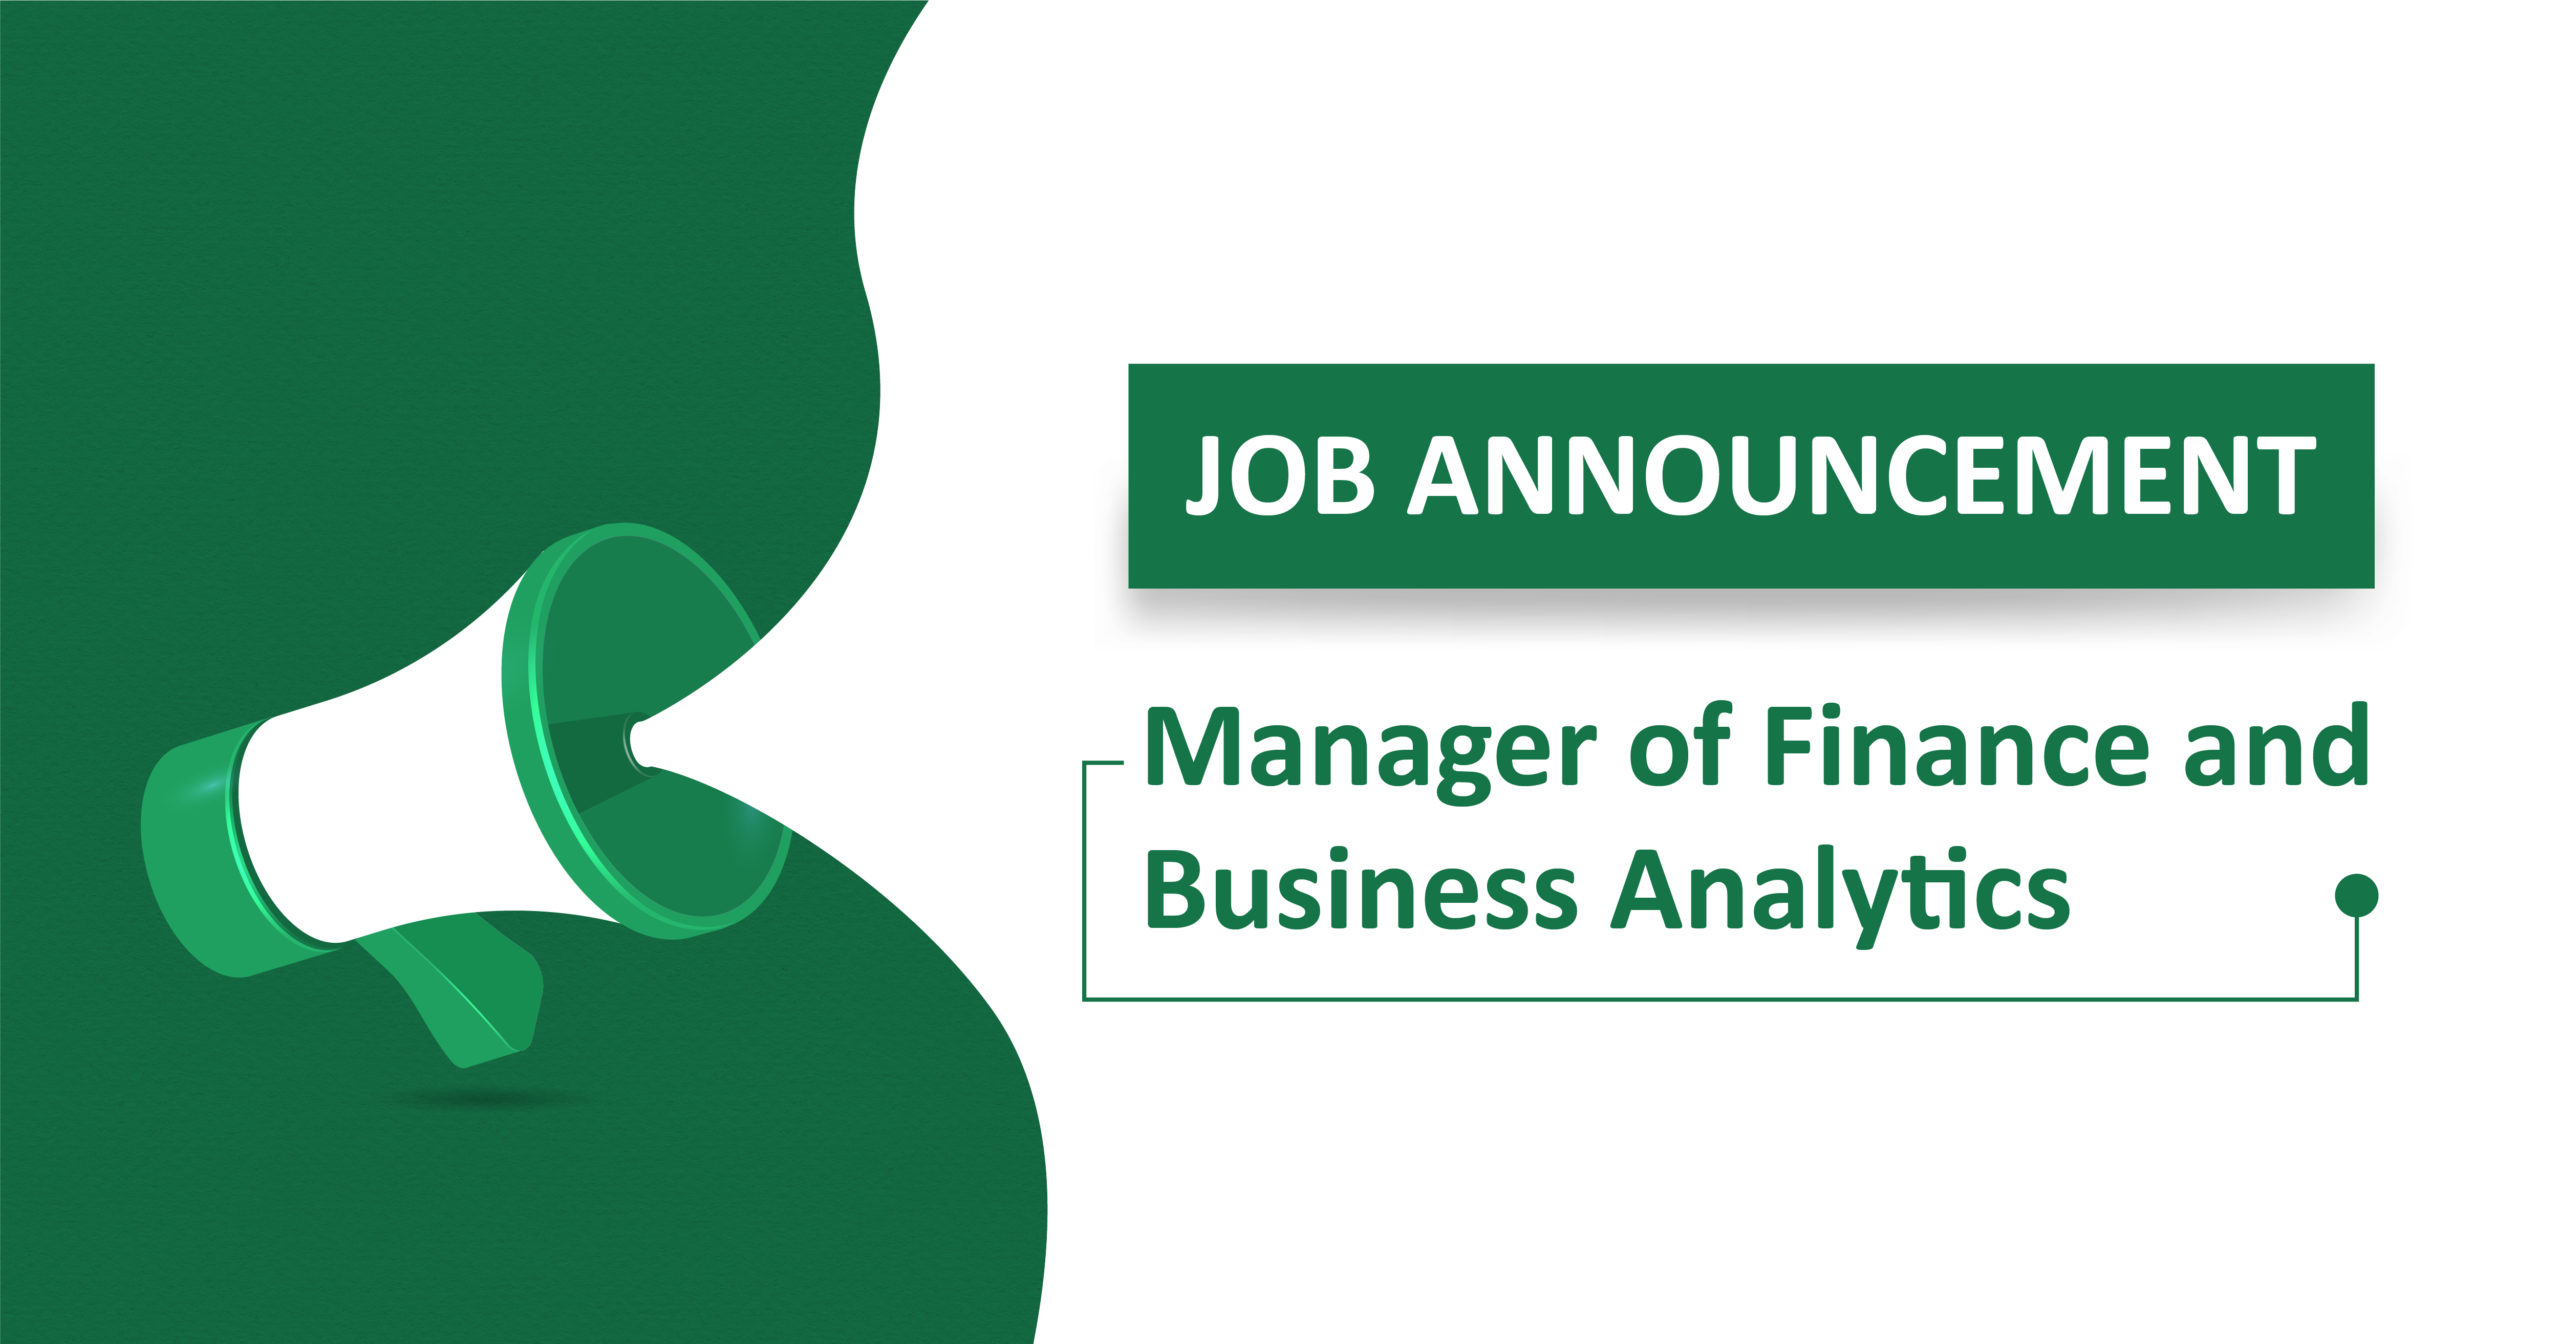 Manager of Finance and Business Analytics